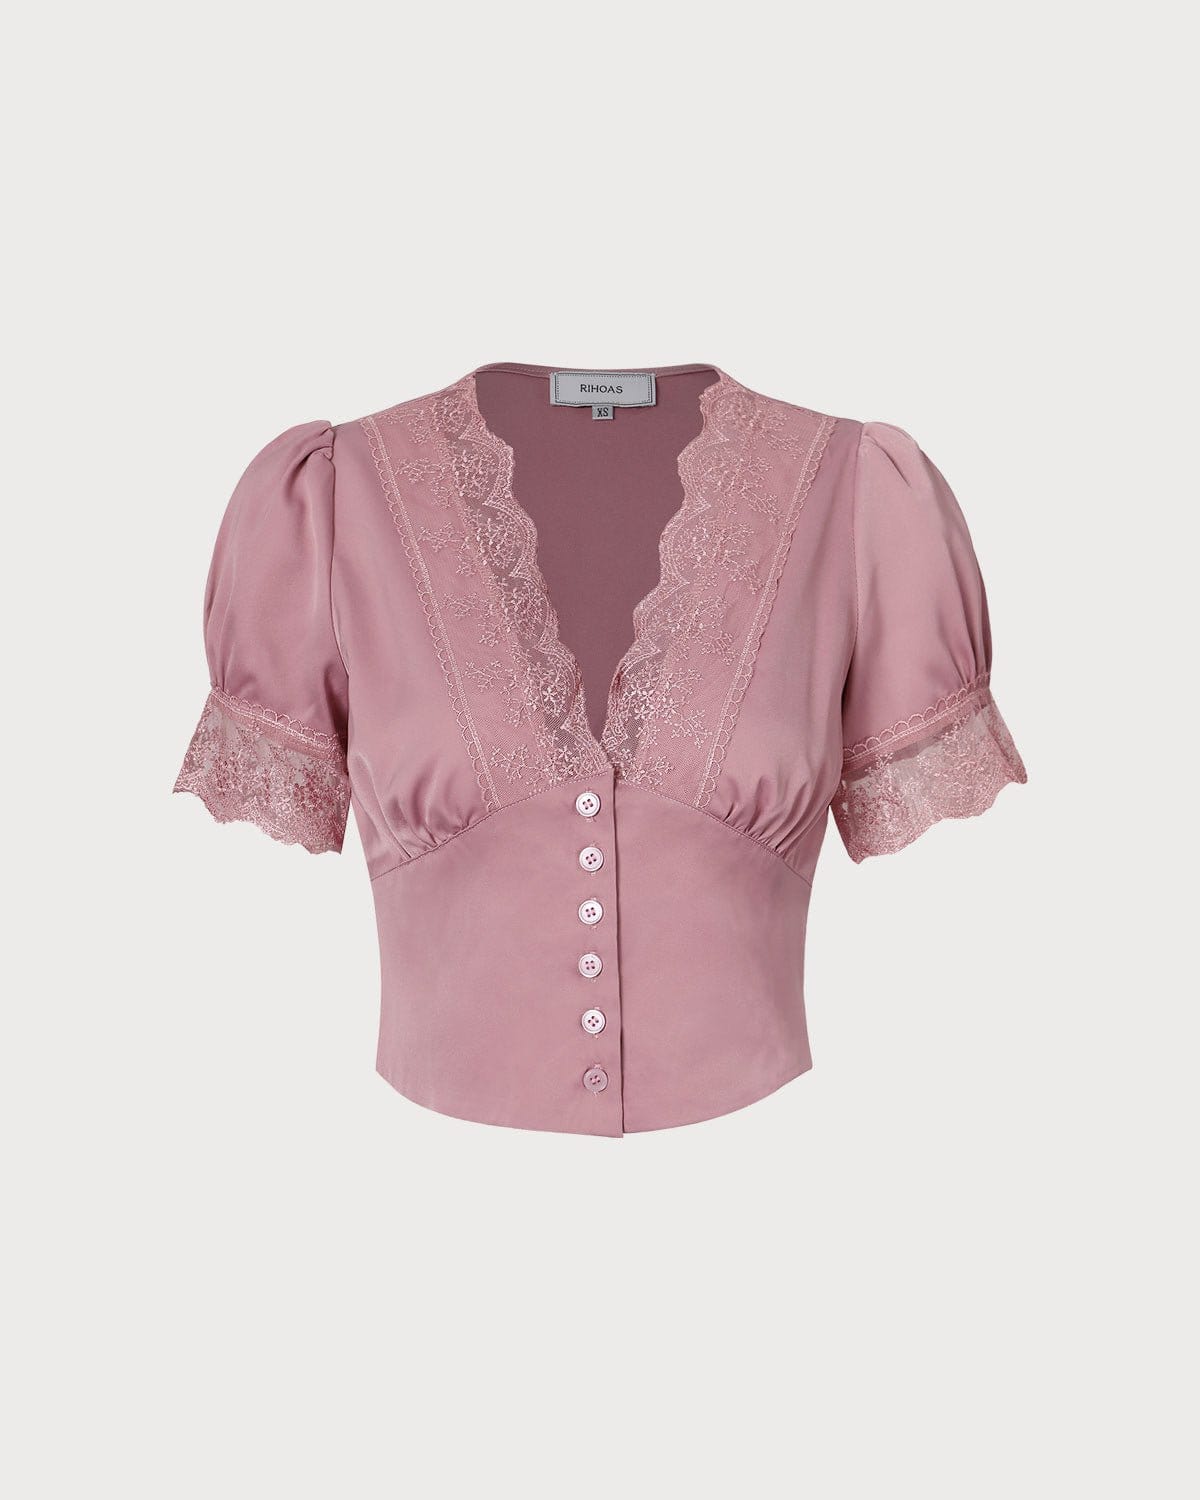 The Pink Satin V Neck Lace Trim Puff Sleeve Blouse - Pink Satin